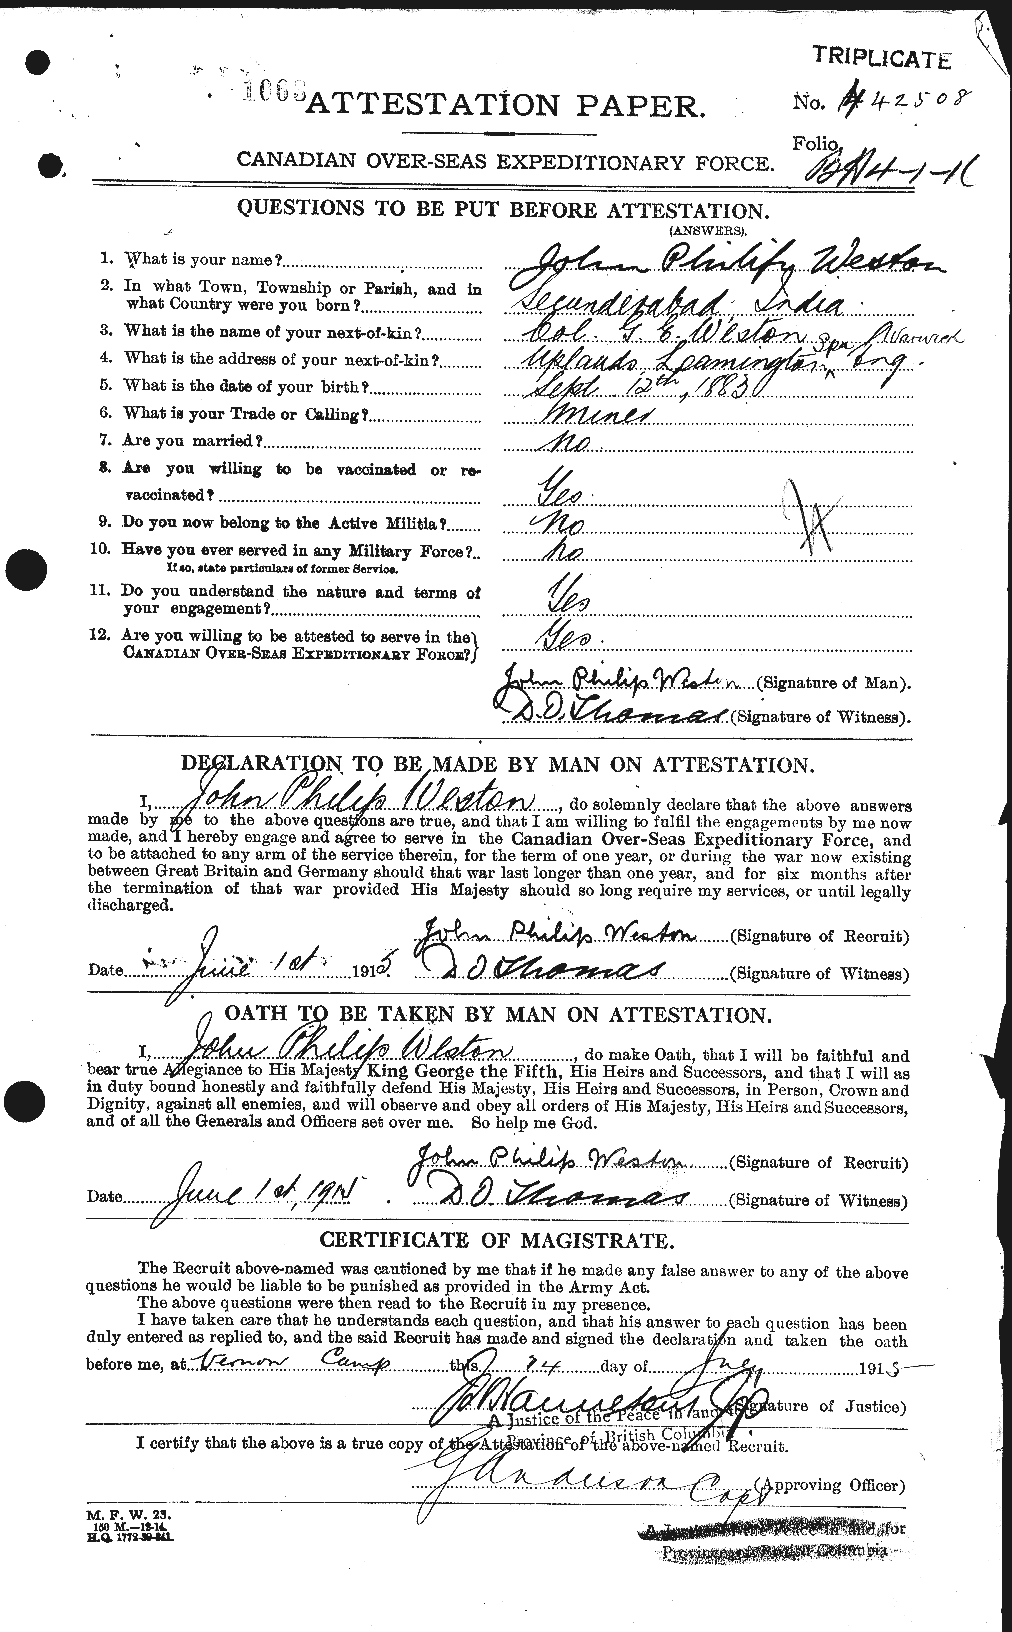 Personnel Records of the First World War - CEF 665776a